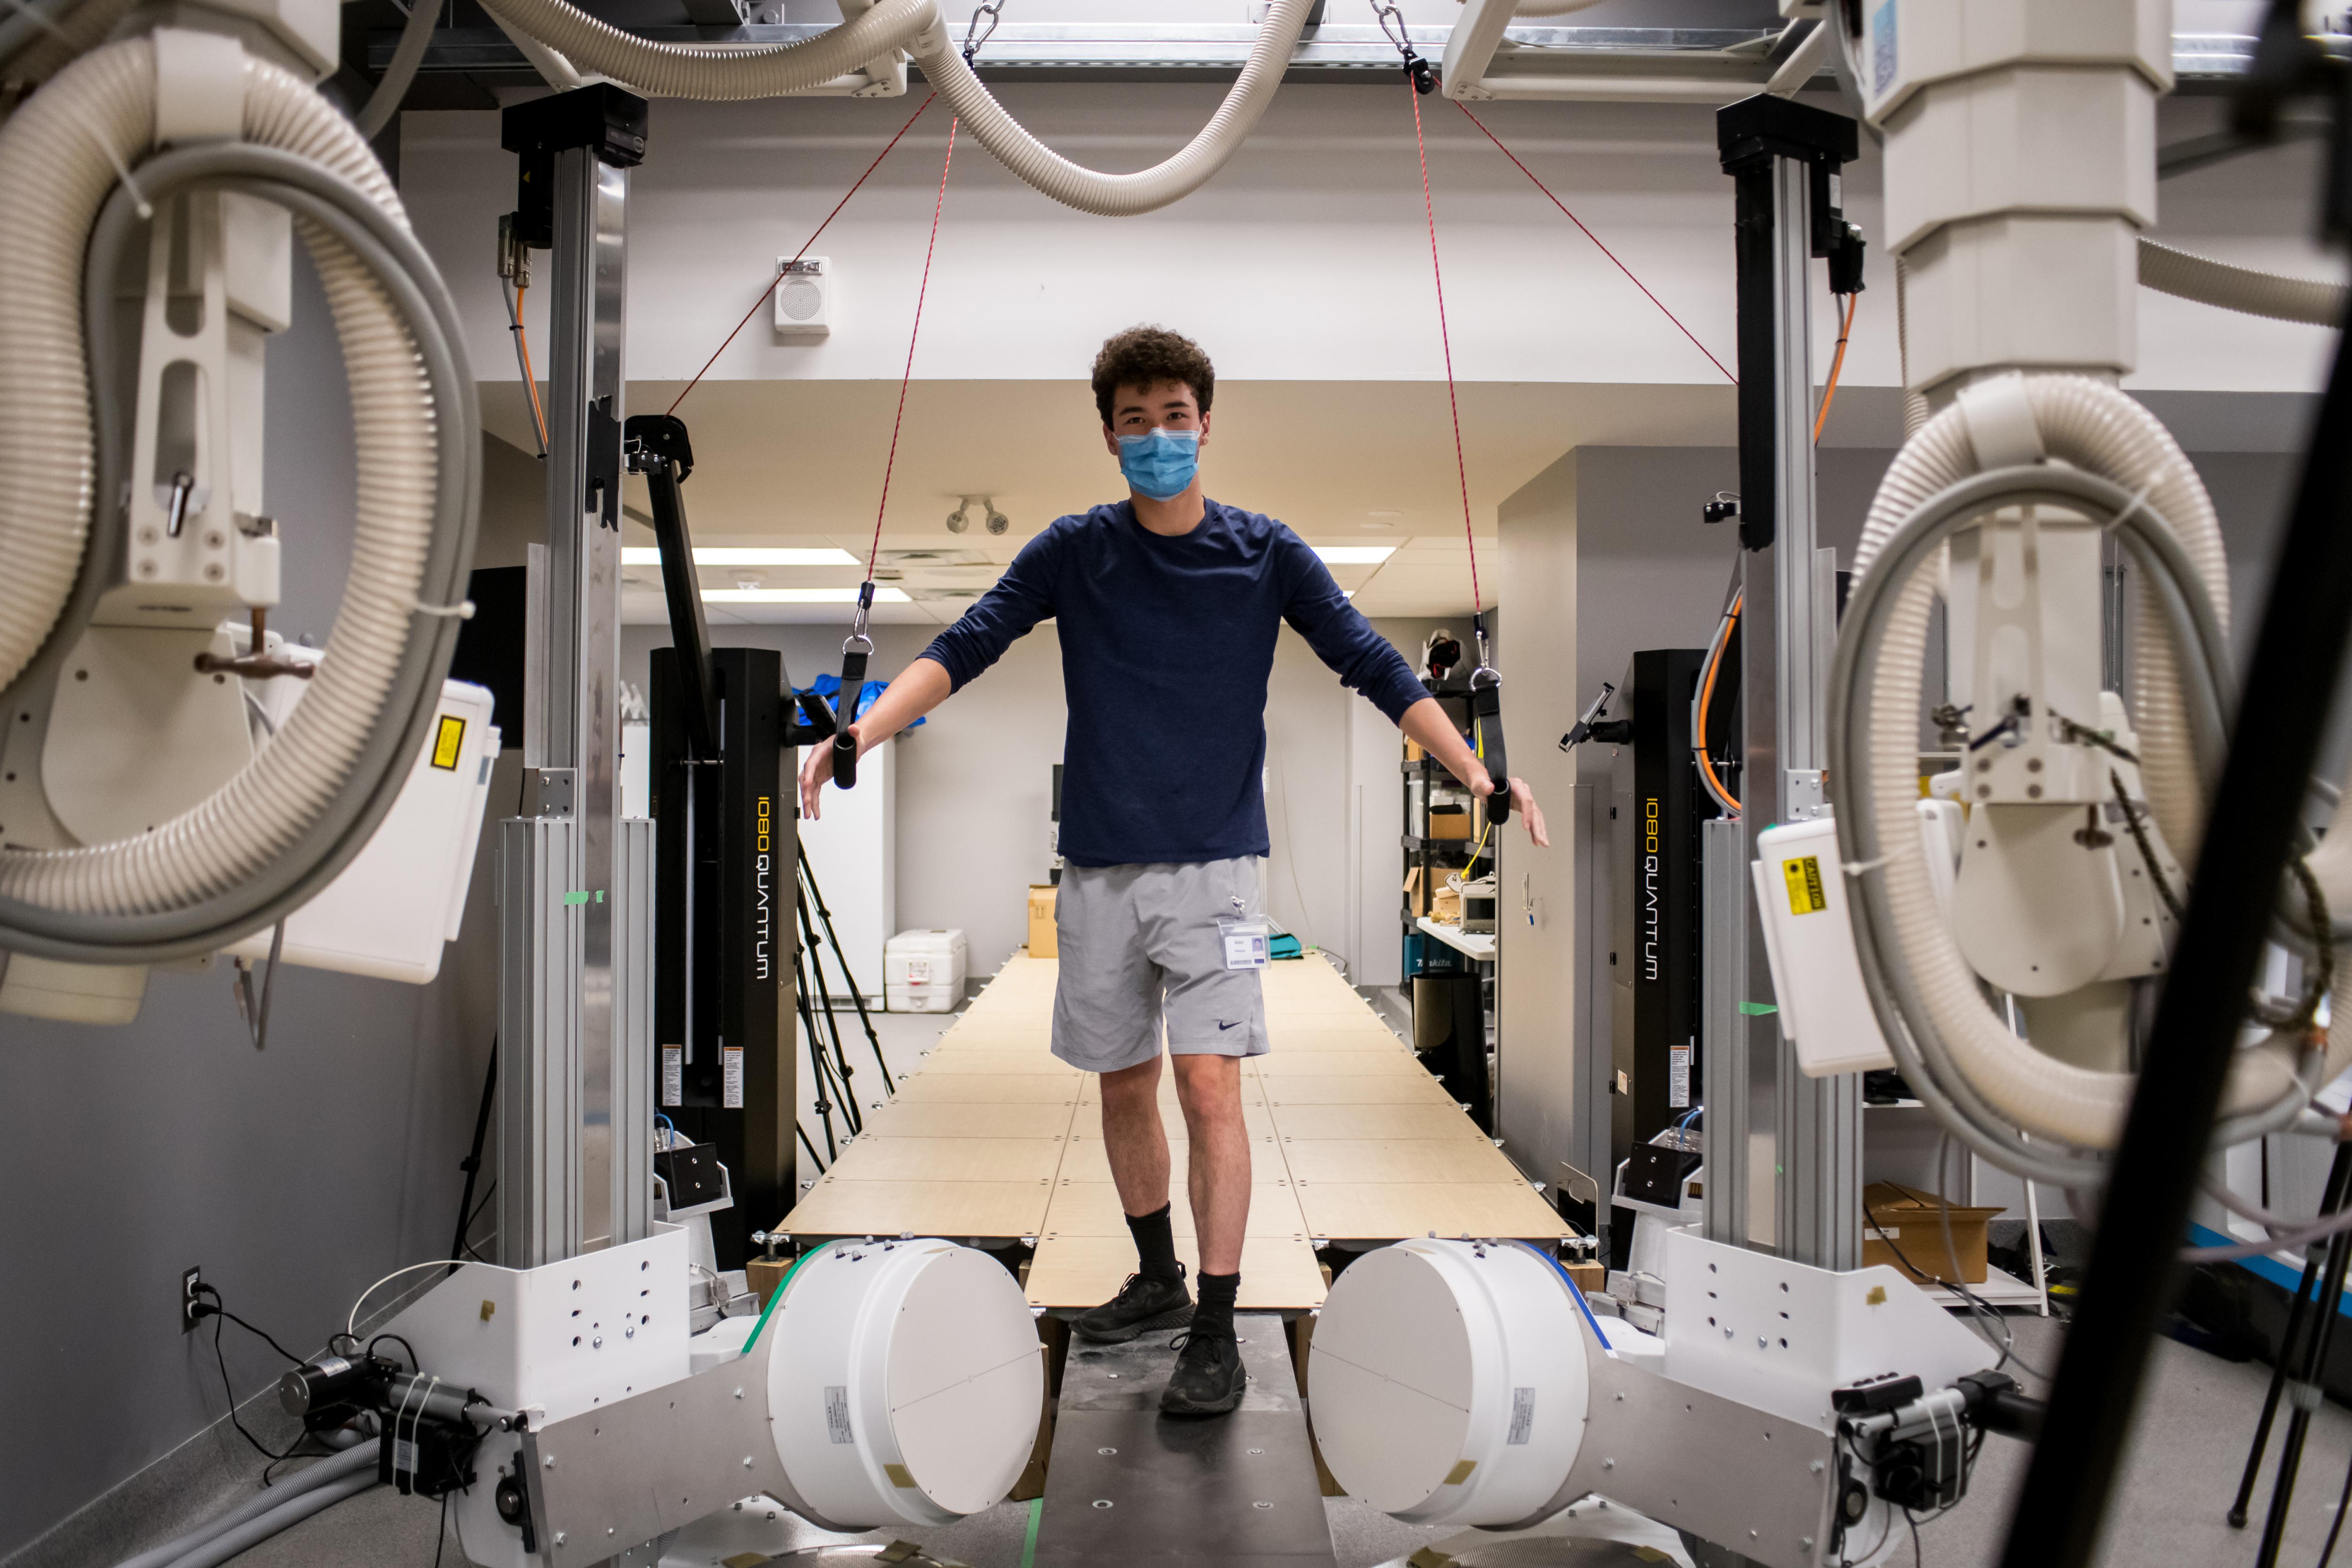 Student in human mobility lab using exercise equipment within large machine